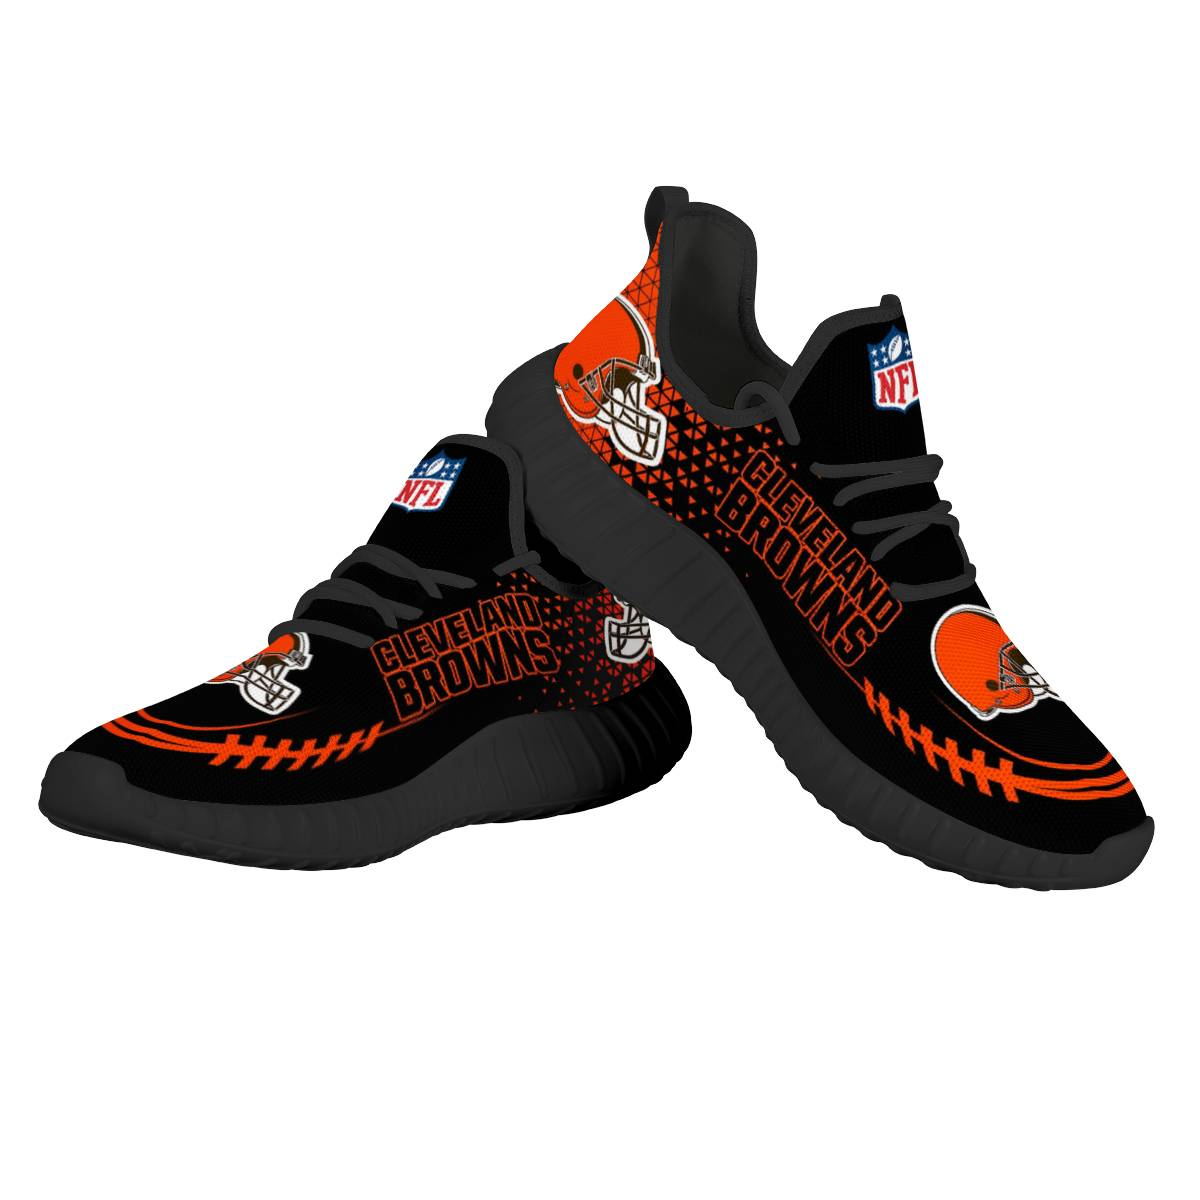 Women's Cleveland Browns Mesh Knit Sneakers/Shoes 009